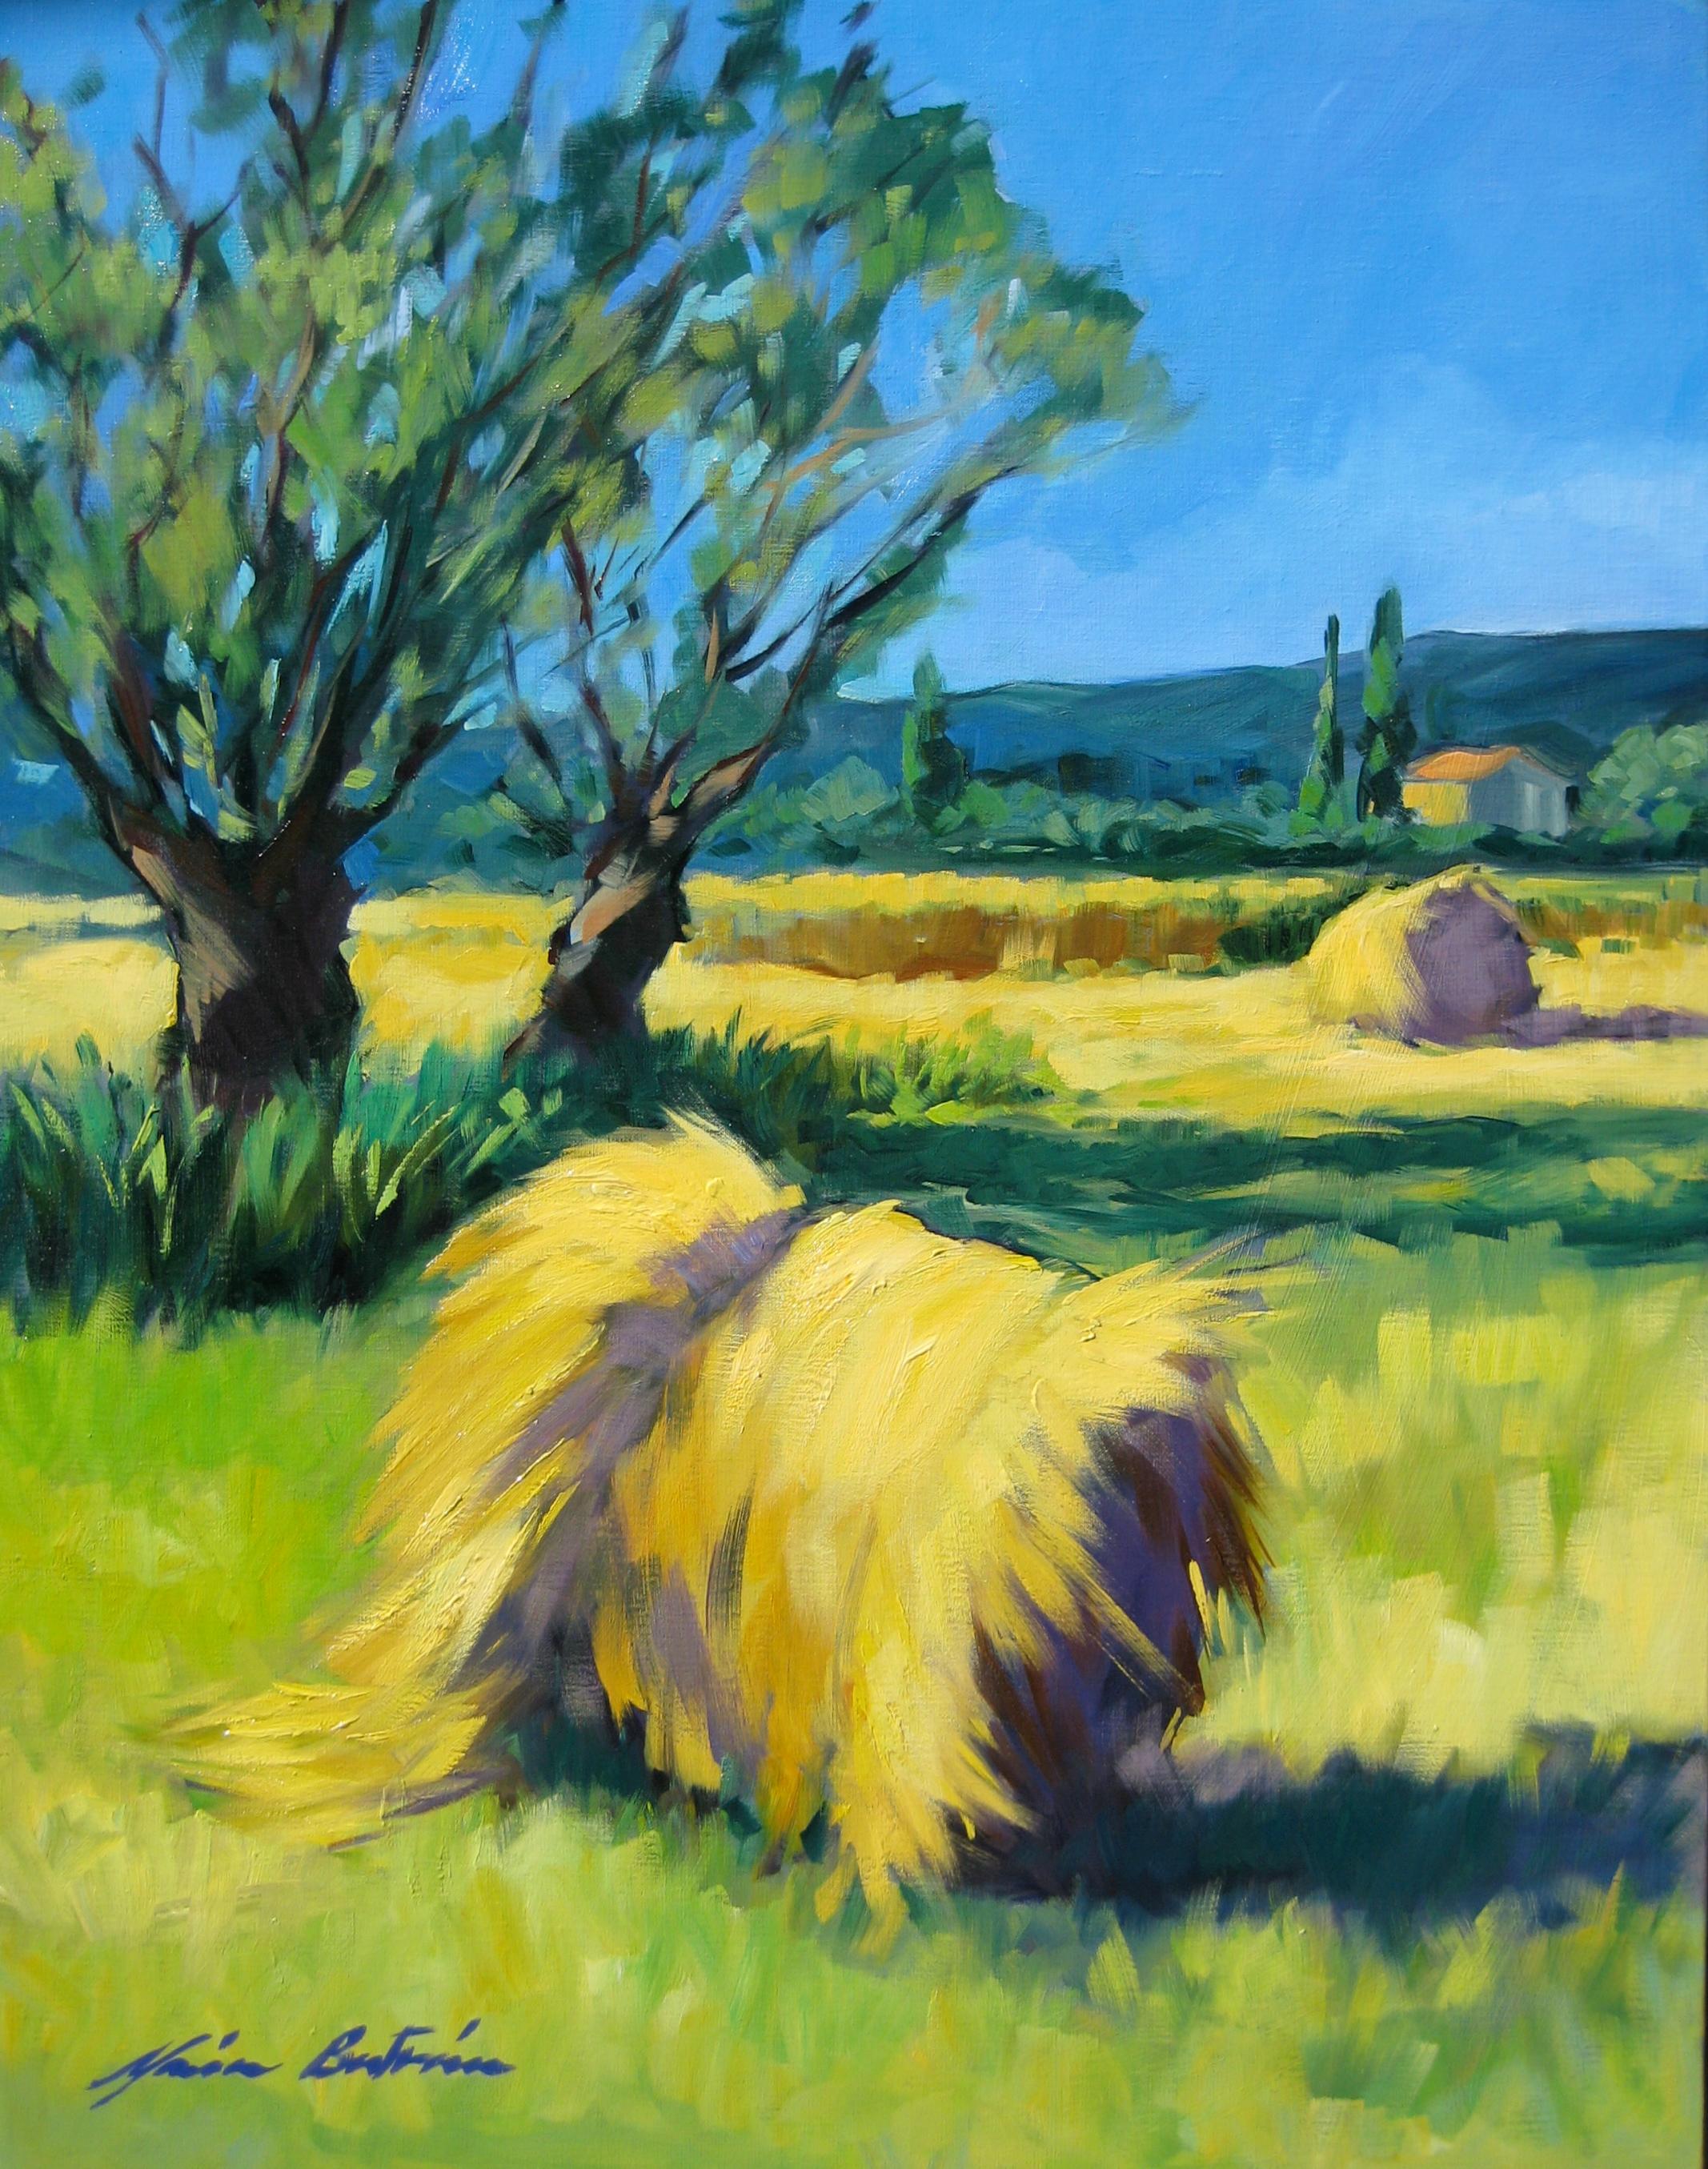 Maria Bertrán Landscape Painting - "Sault Hay Rolls" Contemporary Impressionist Oil Painting by Maria Bertran